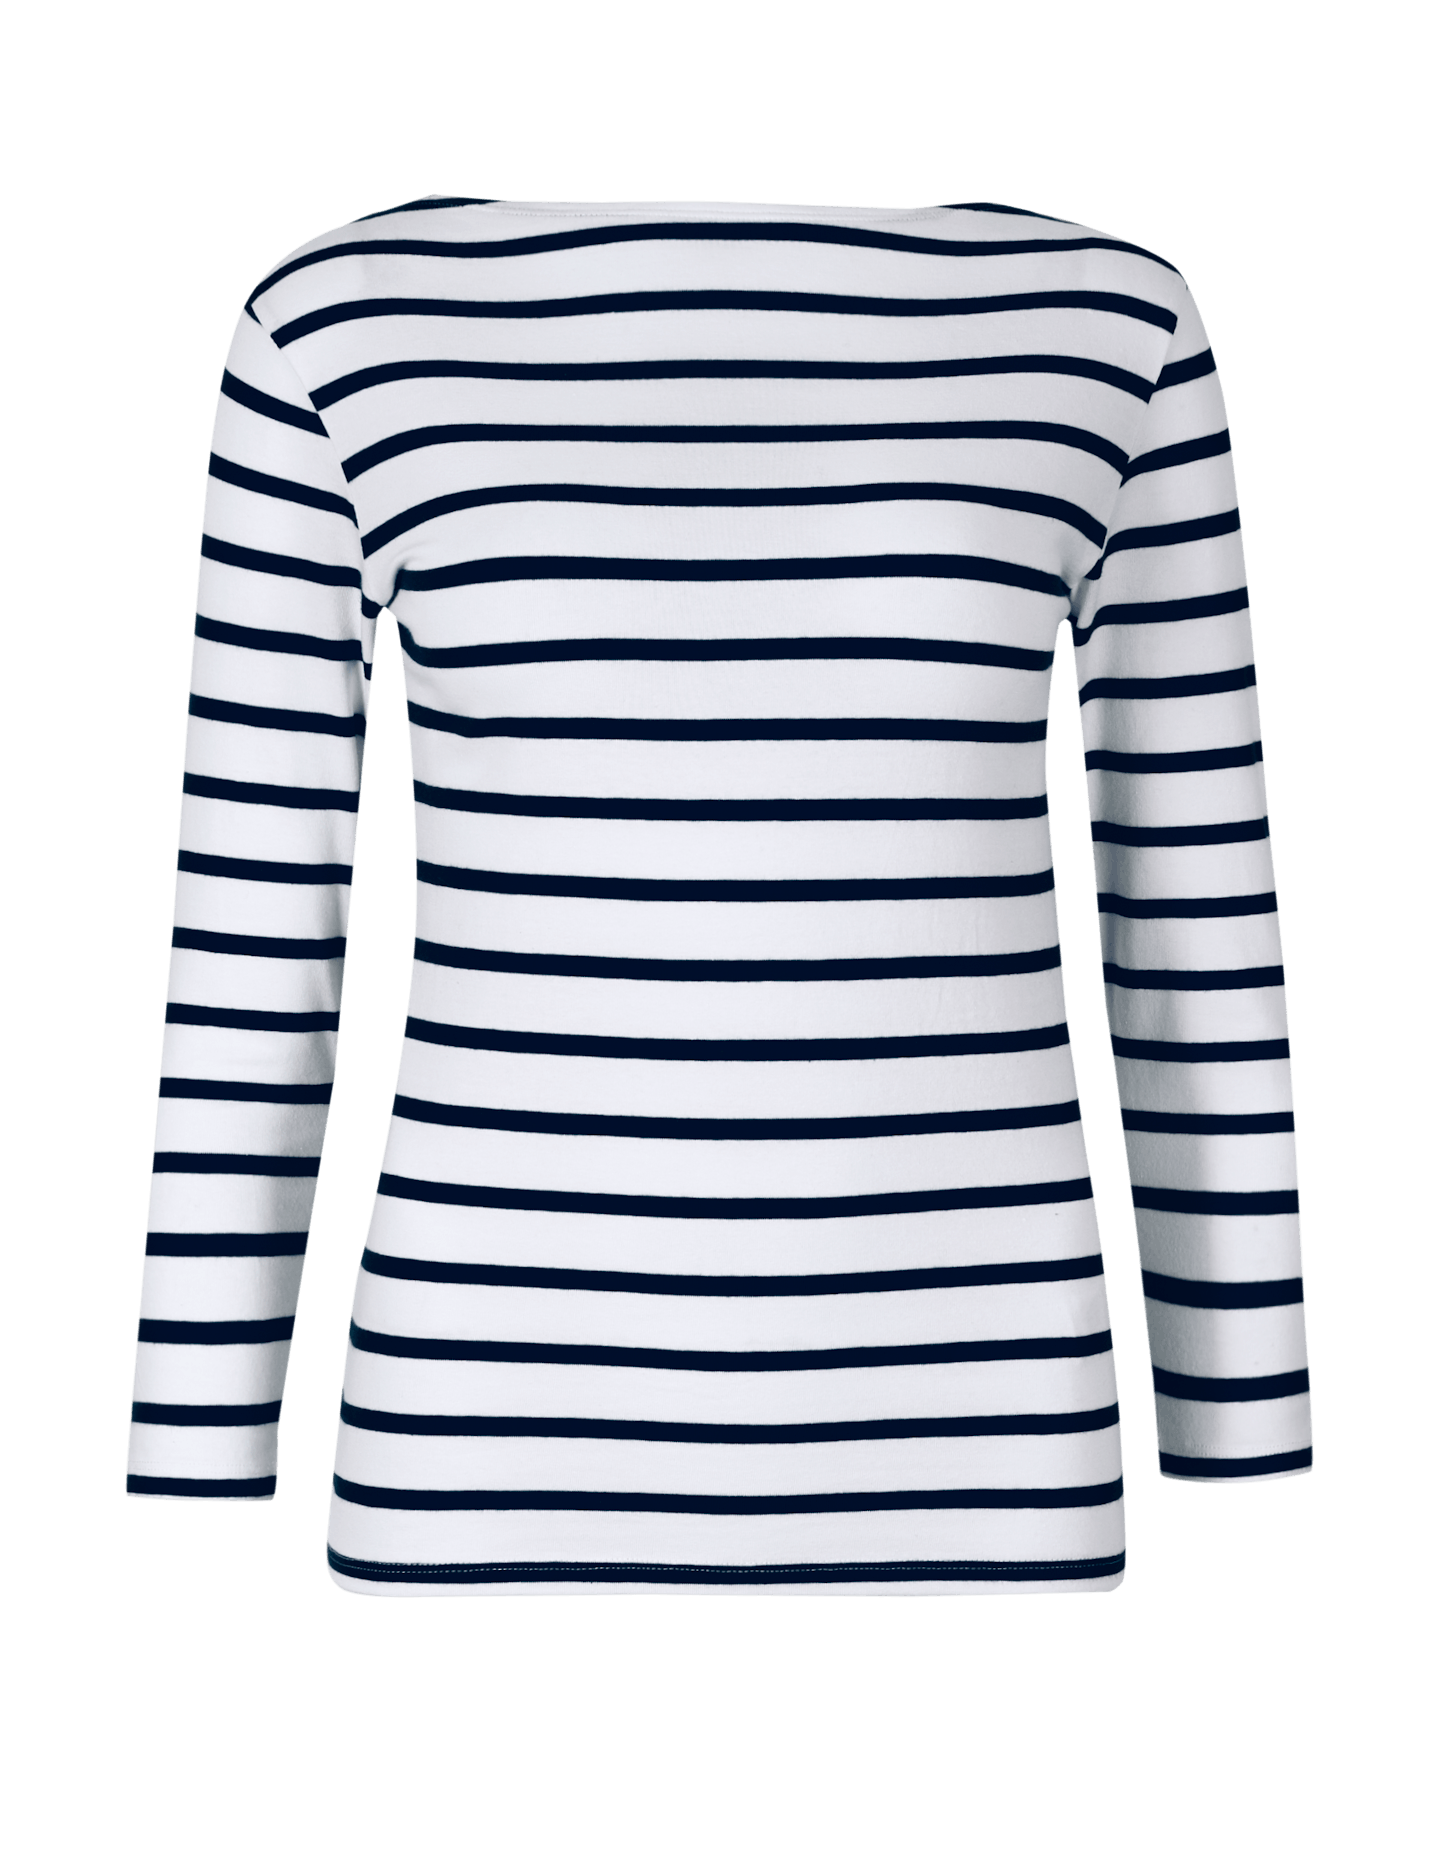 Holly Willoughby M&S Cotton rich striped fitted T-shirt, 8.50